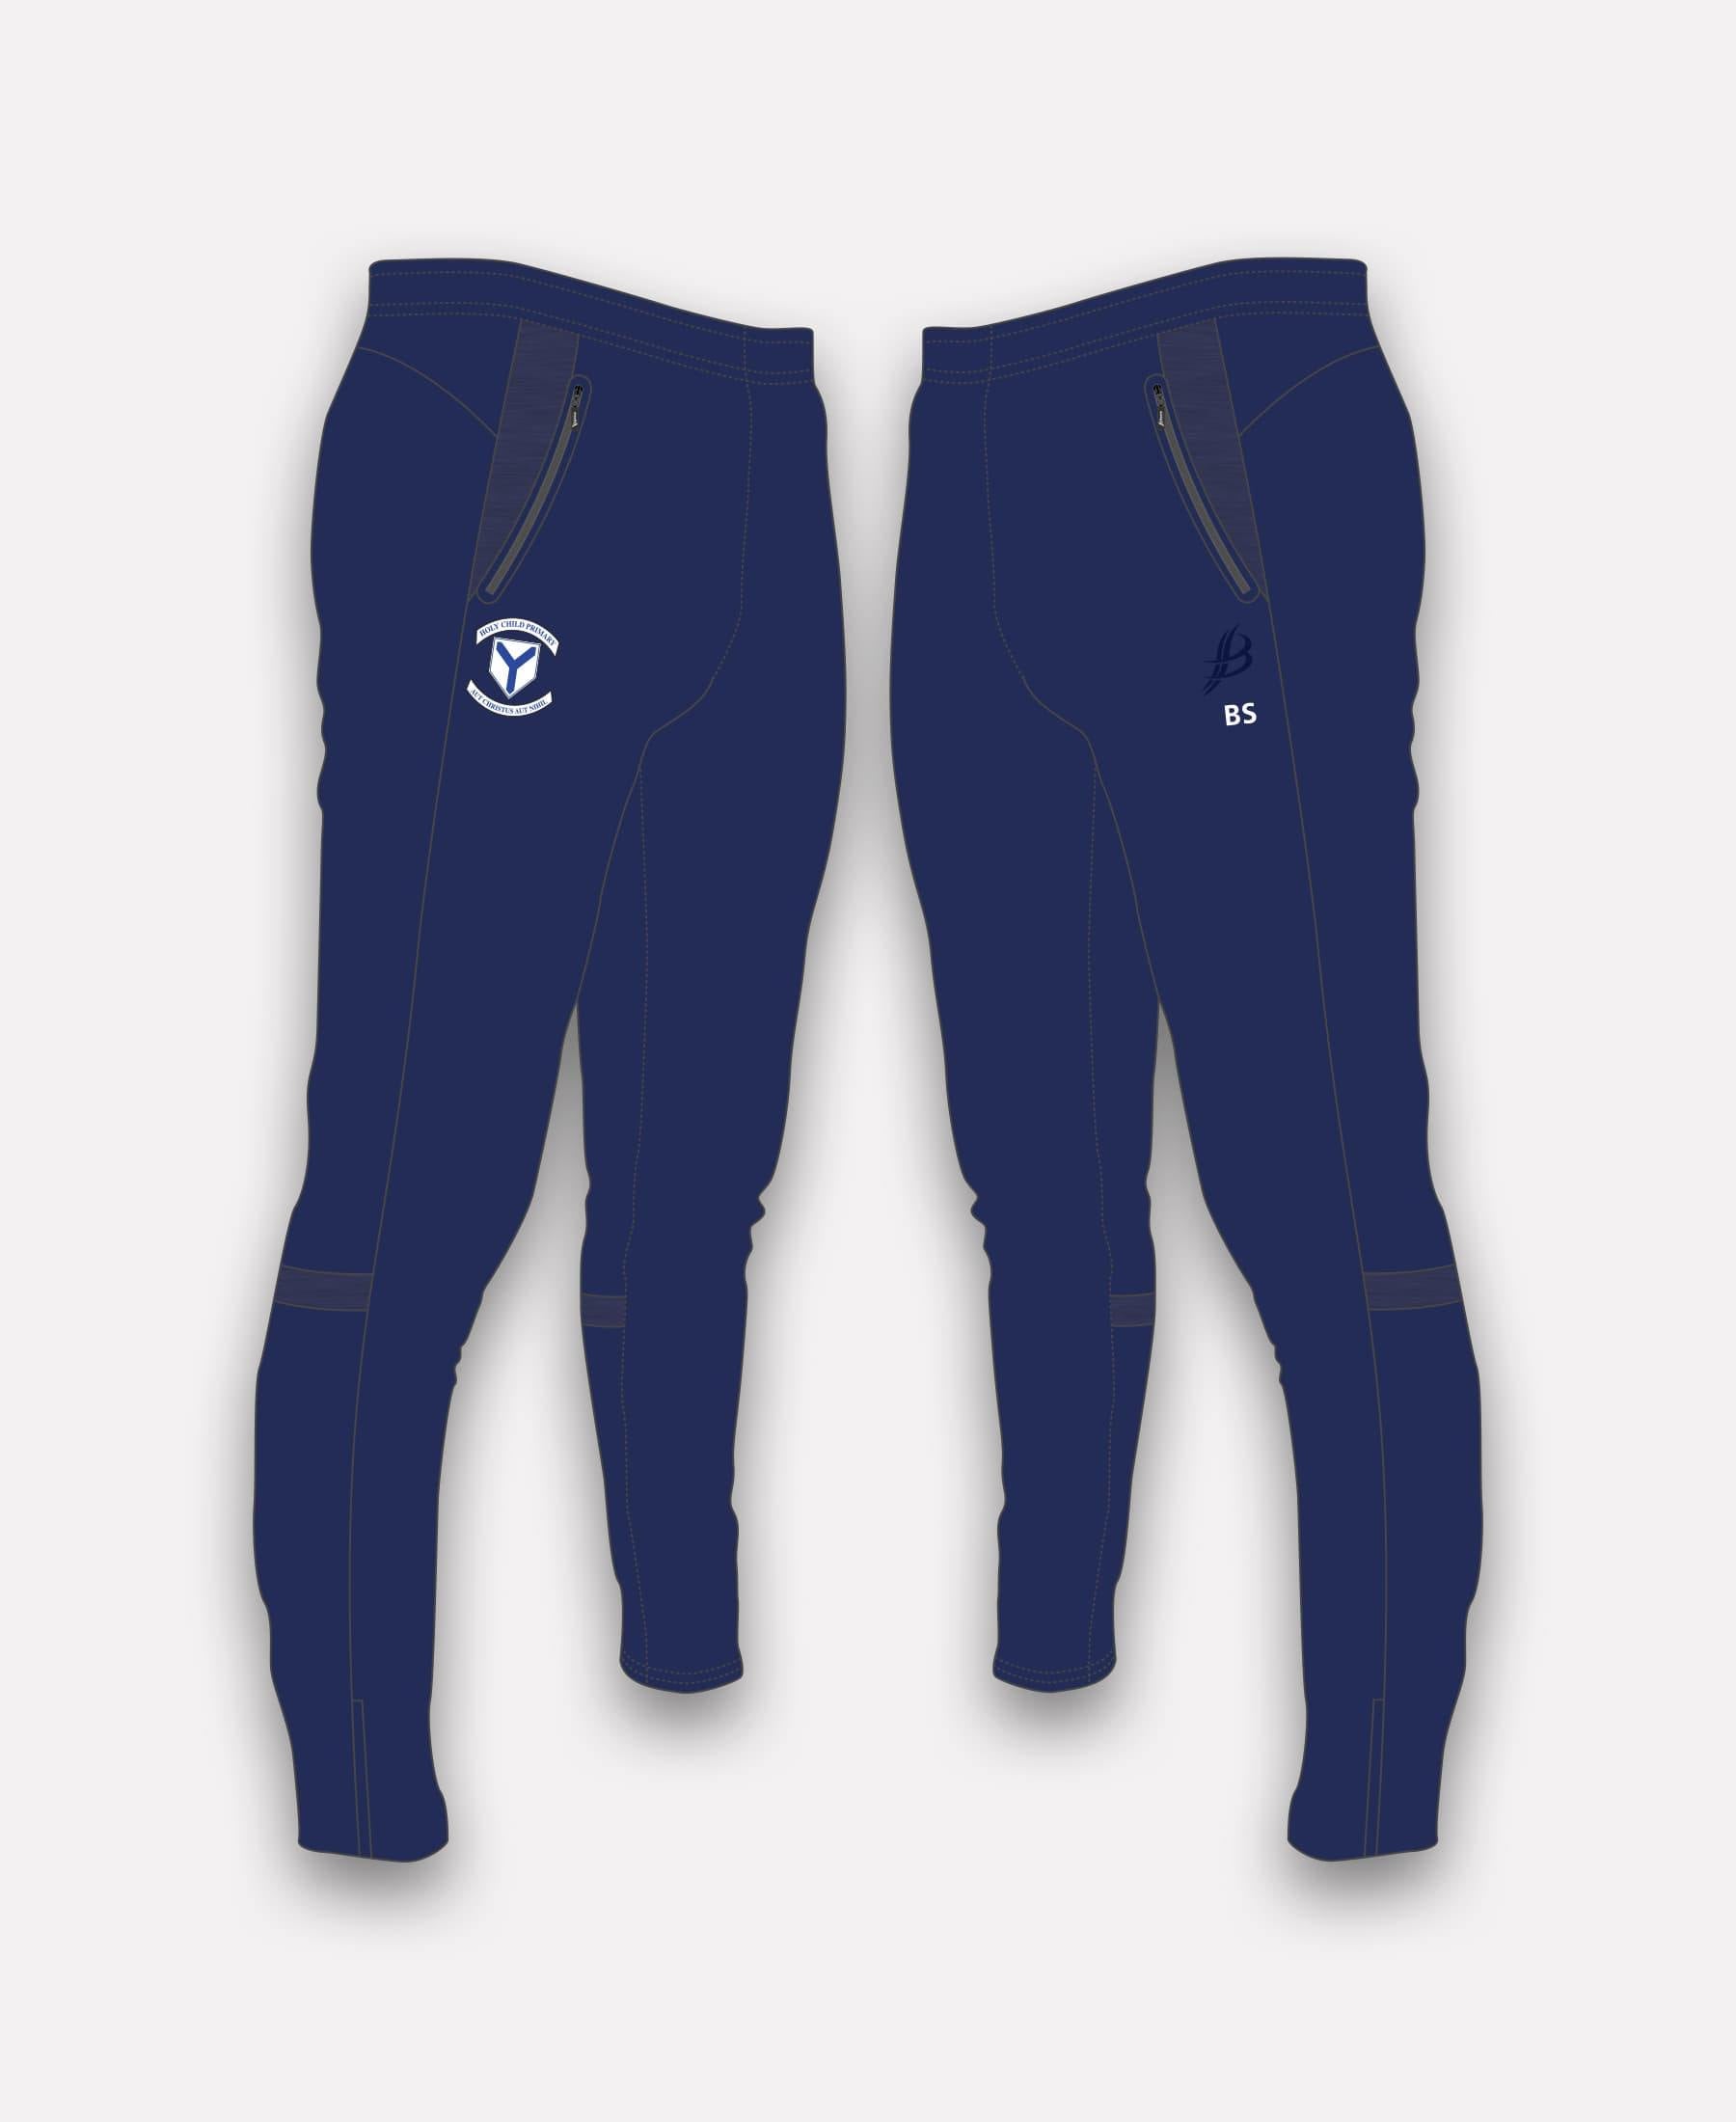 Holy Child Primary School BUA Skinny Pants - Bourke Sports Limited